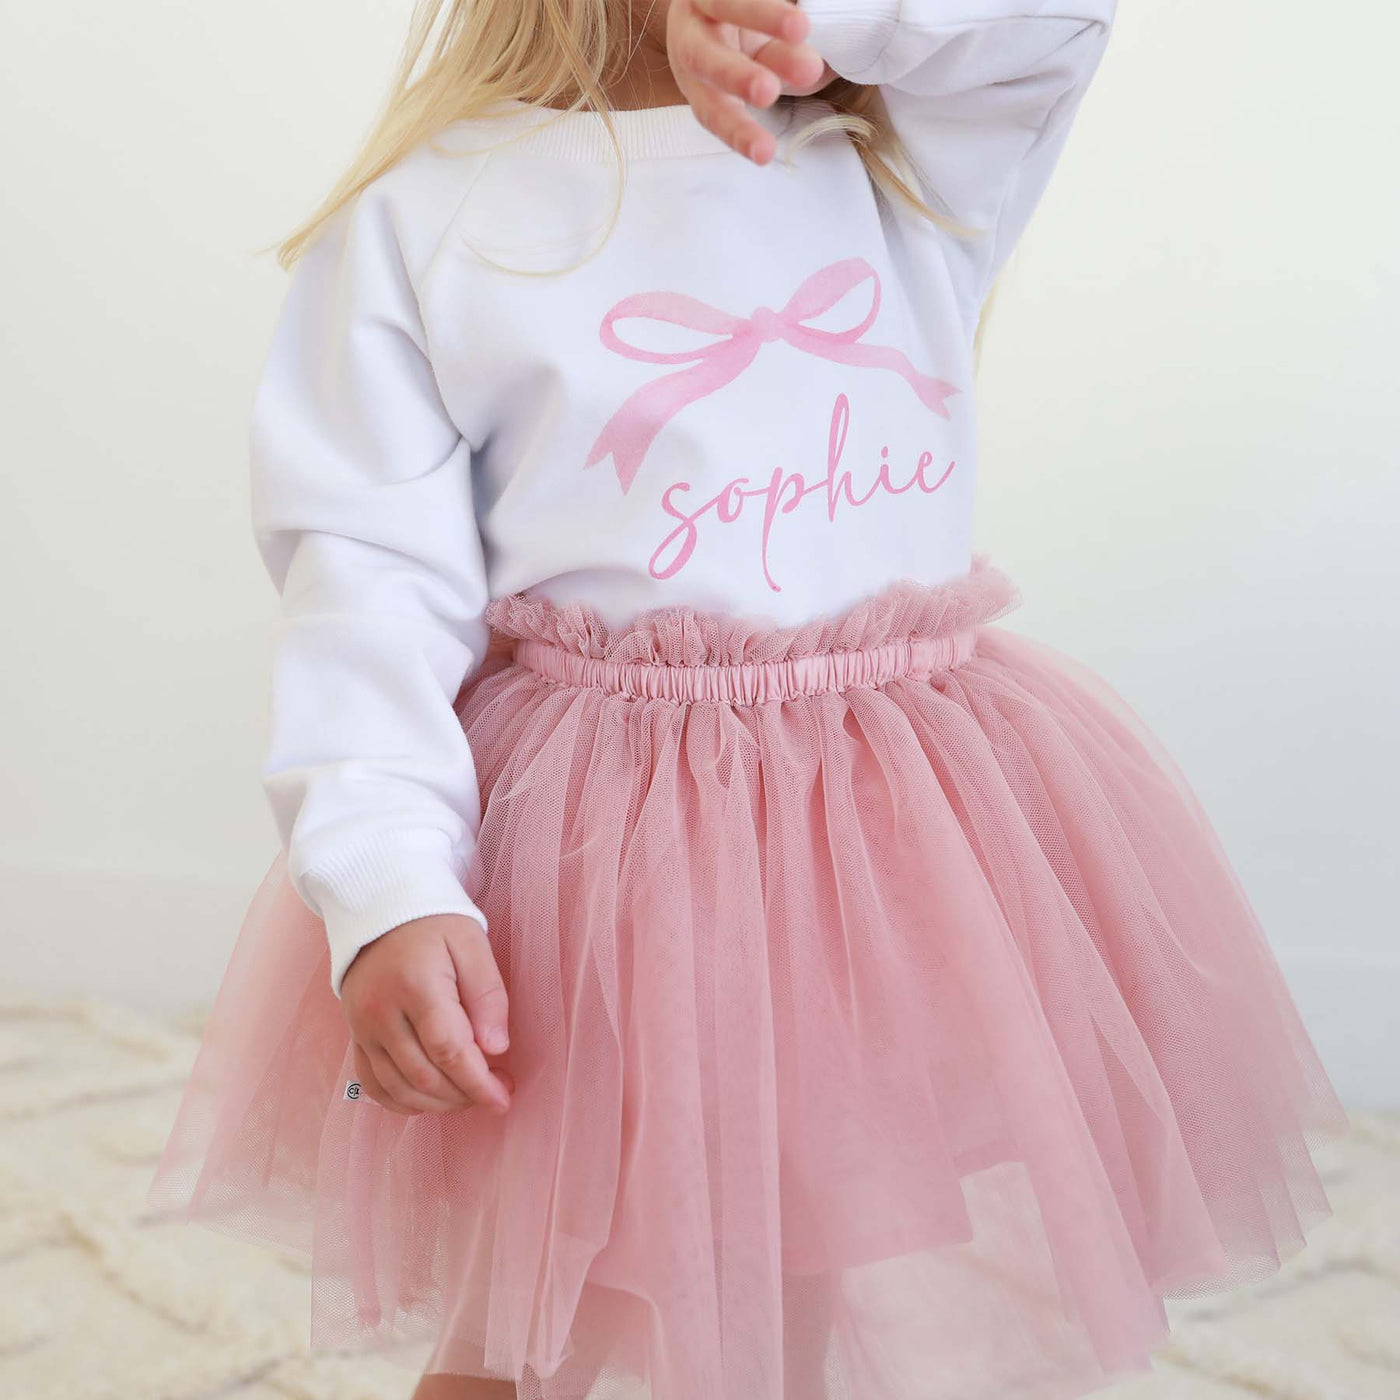 pink ribbon bow personalized sweatshirt for kids 